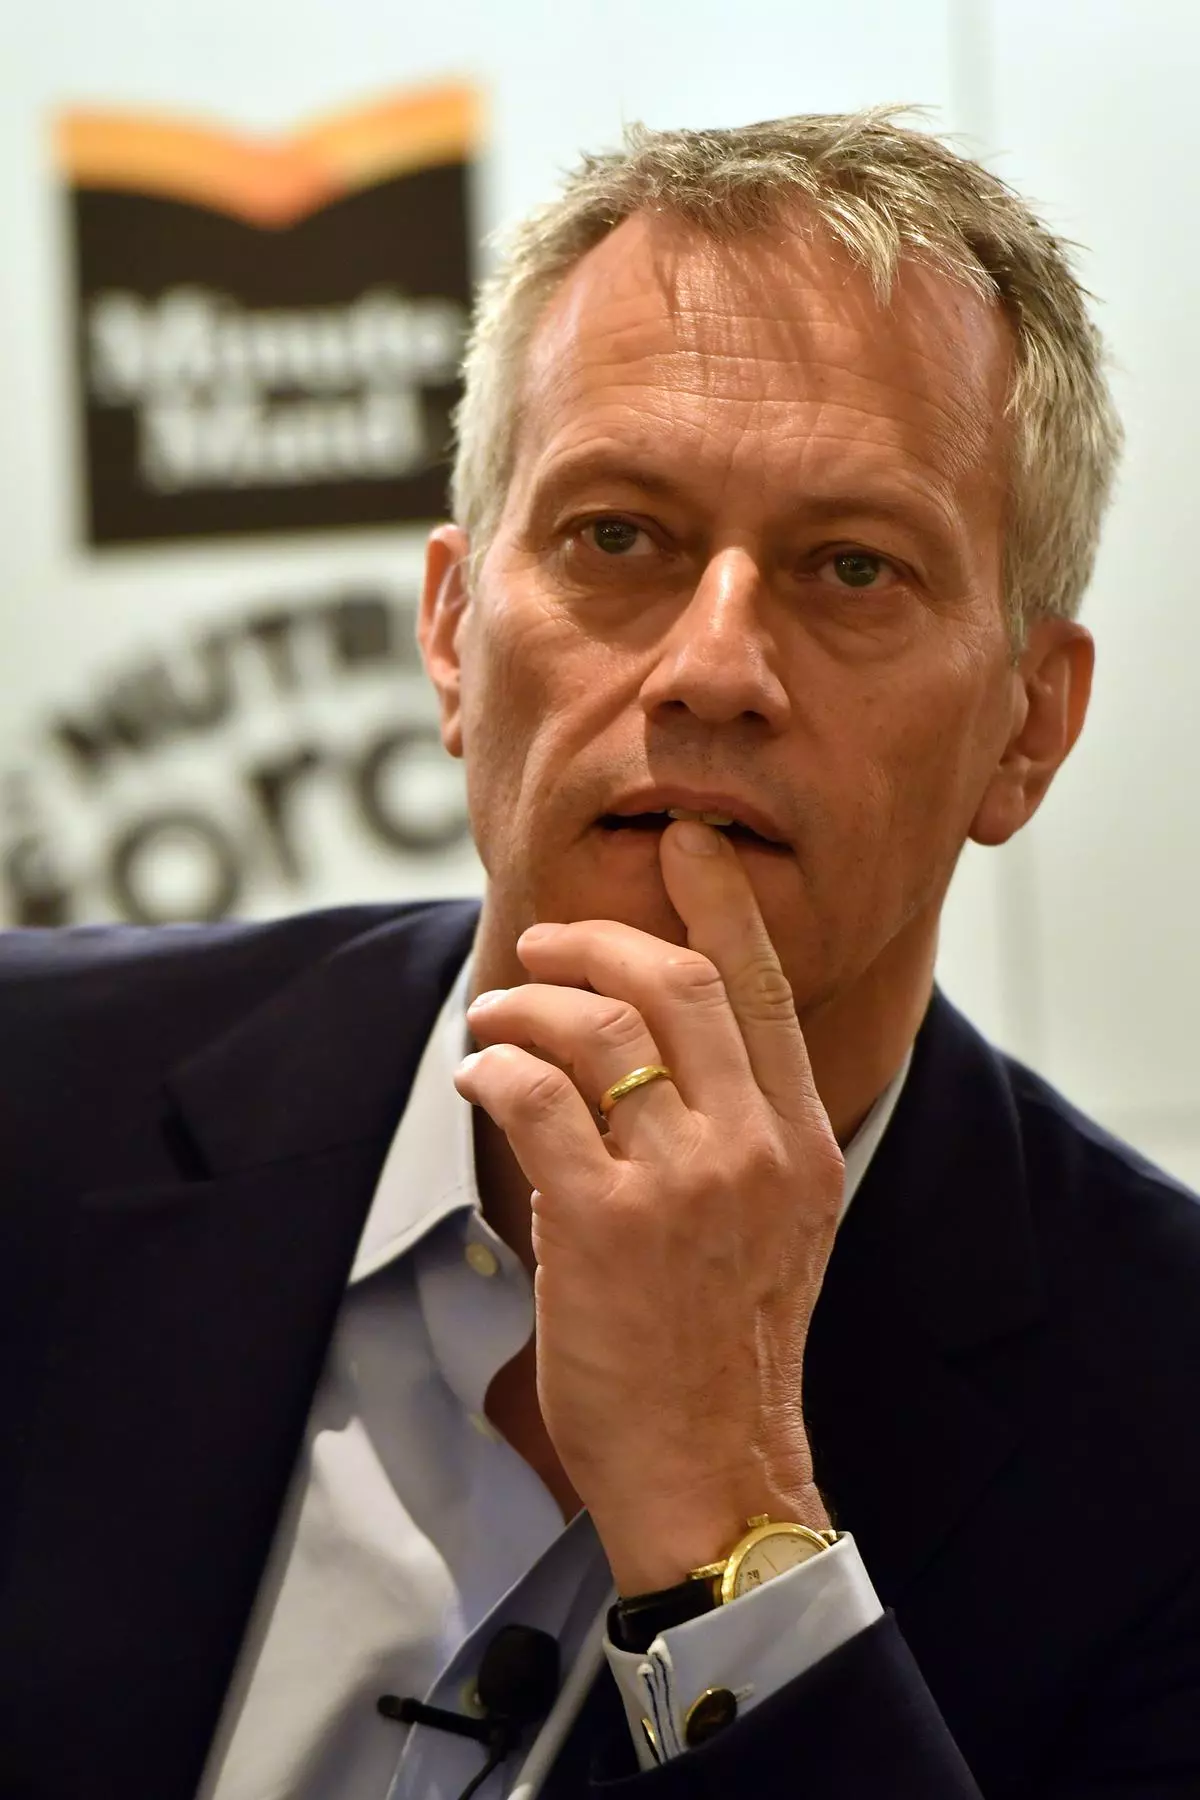 James Quincey, Chairman and CEO of The Coca-Cola Company